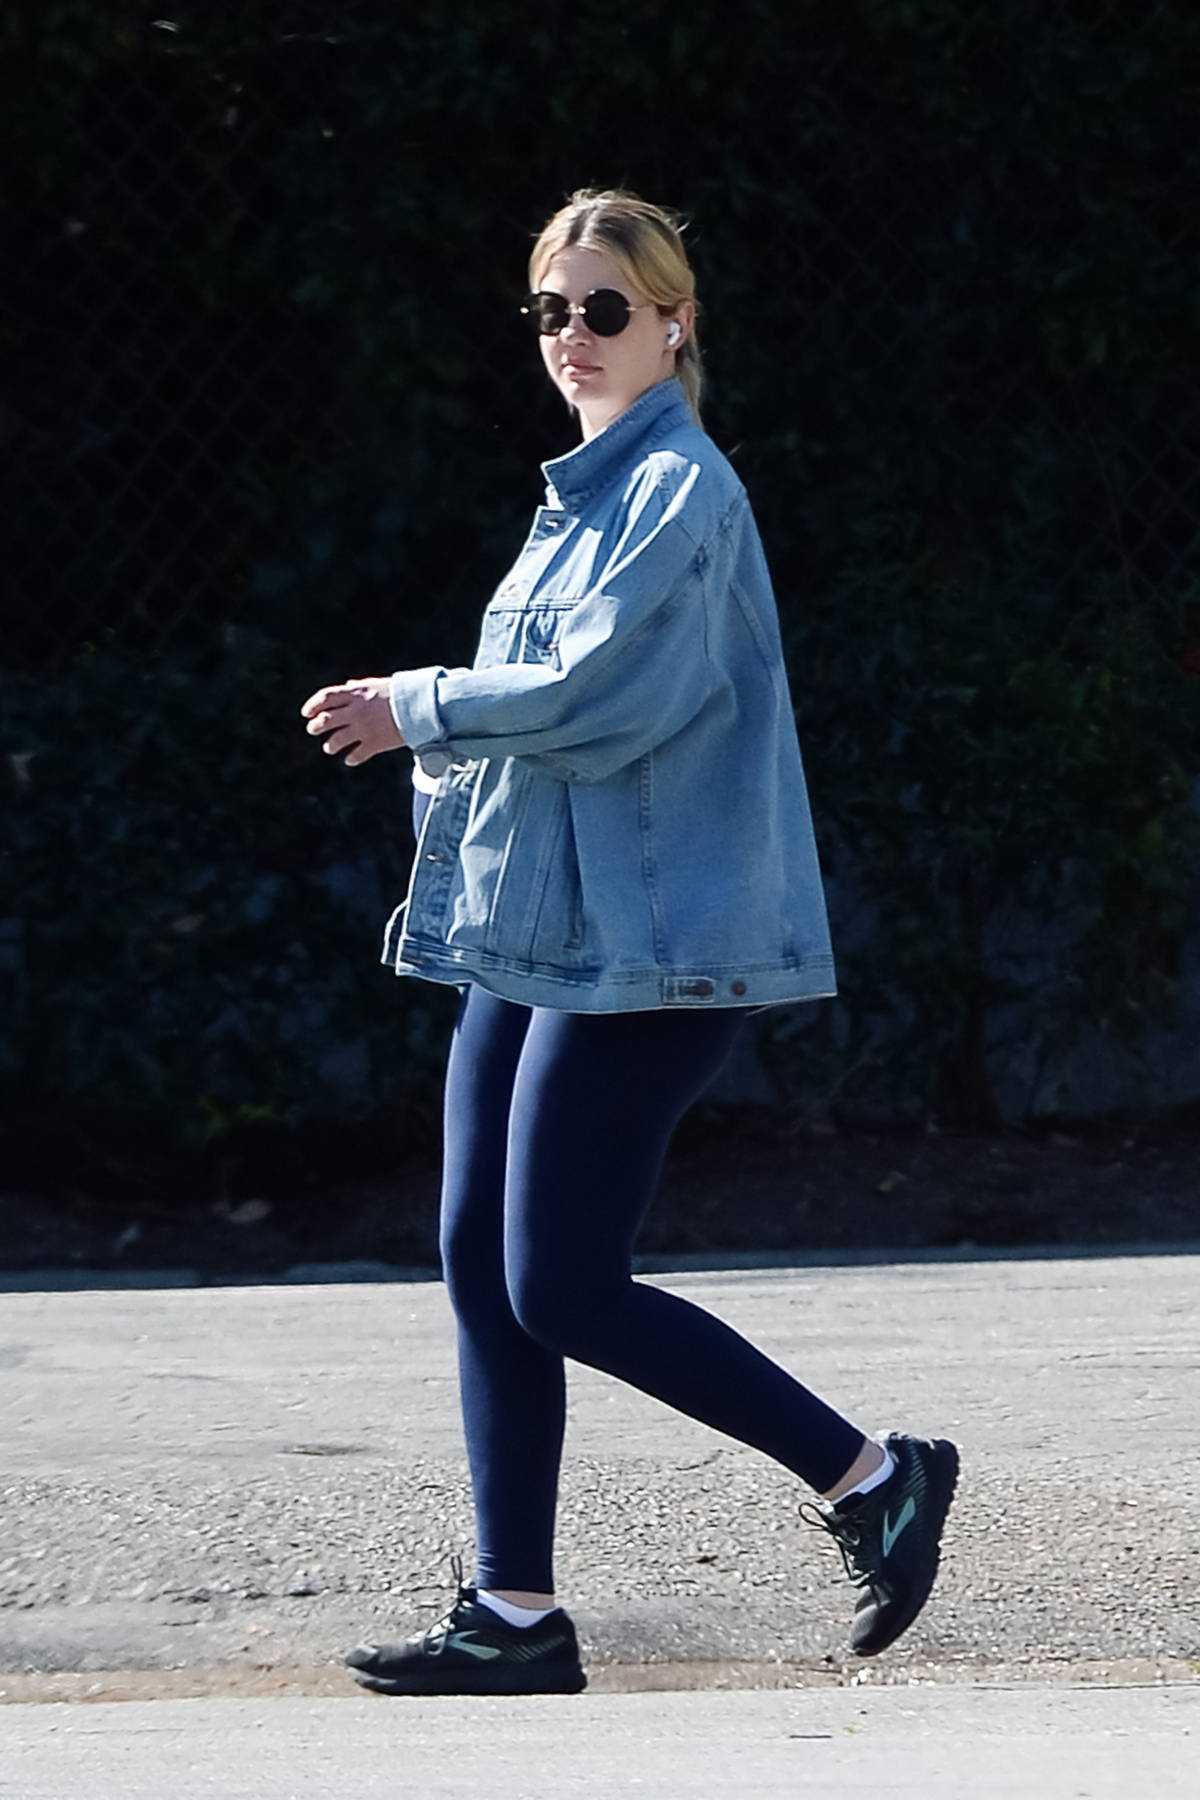 https://www.celebsfirst.com/wp-content/uploads/2022/03/mia-goth-shows-her-huge-baby-bump-in-a-white-tee-and-navy-blue-leggings-while-out-for-walk-in-los-angeles-180322_14.jpg